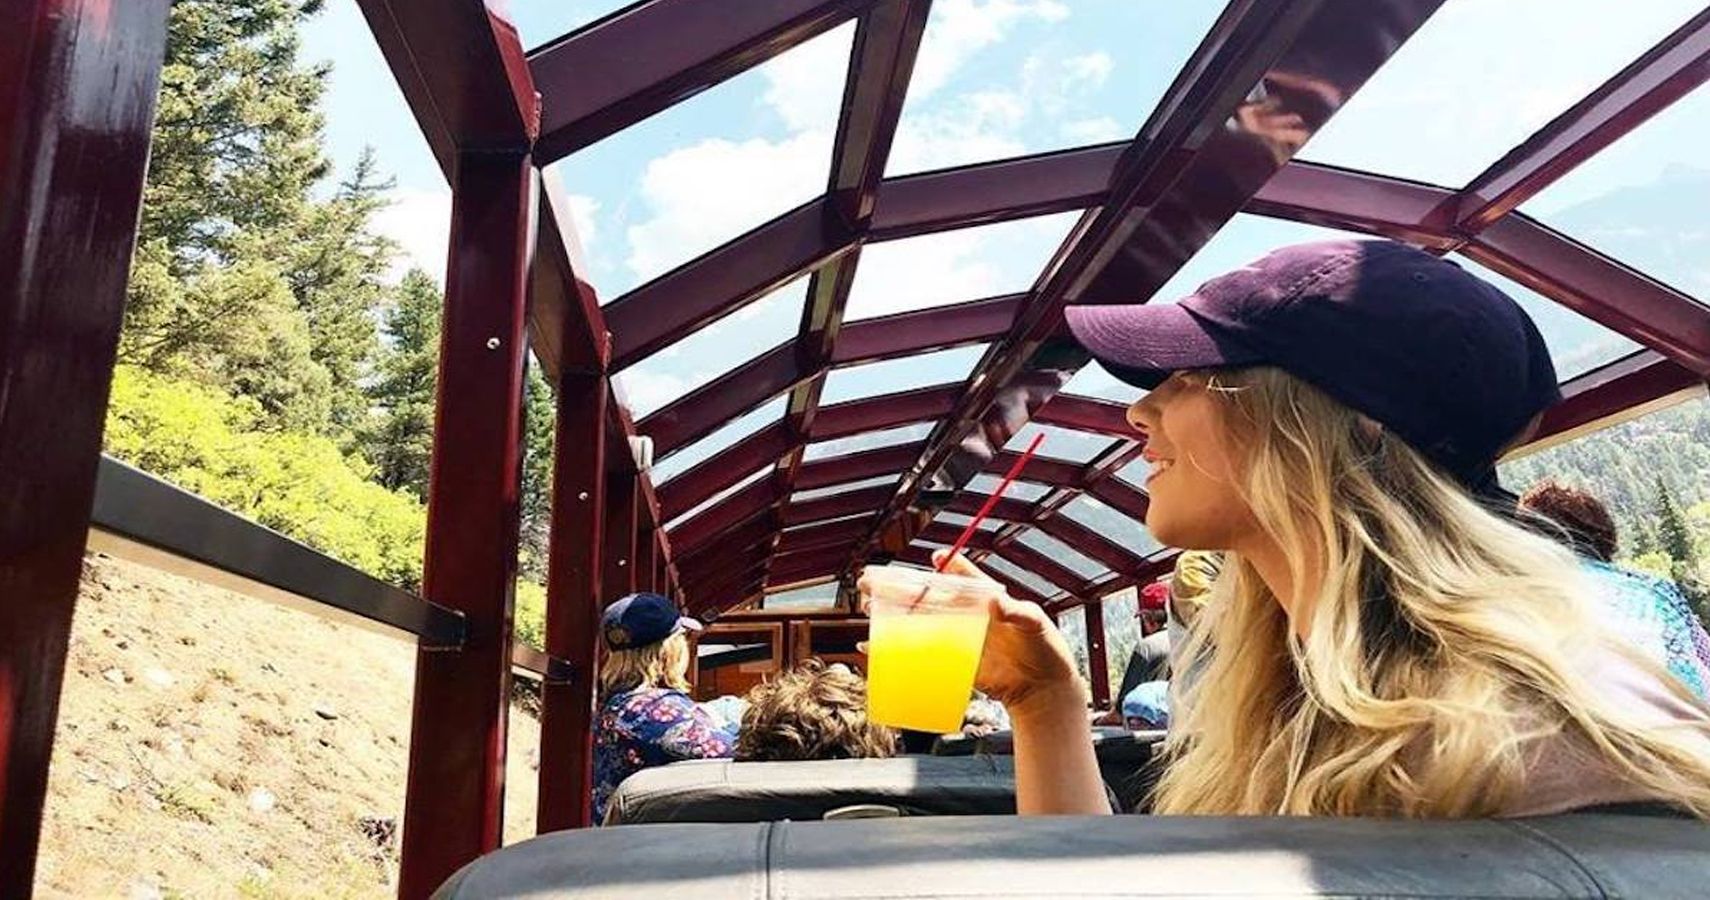 Colorado's Brew Train Offers Great Wilderness Views While Serving Craft